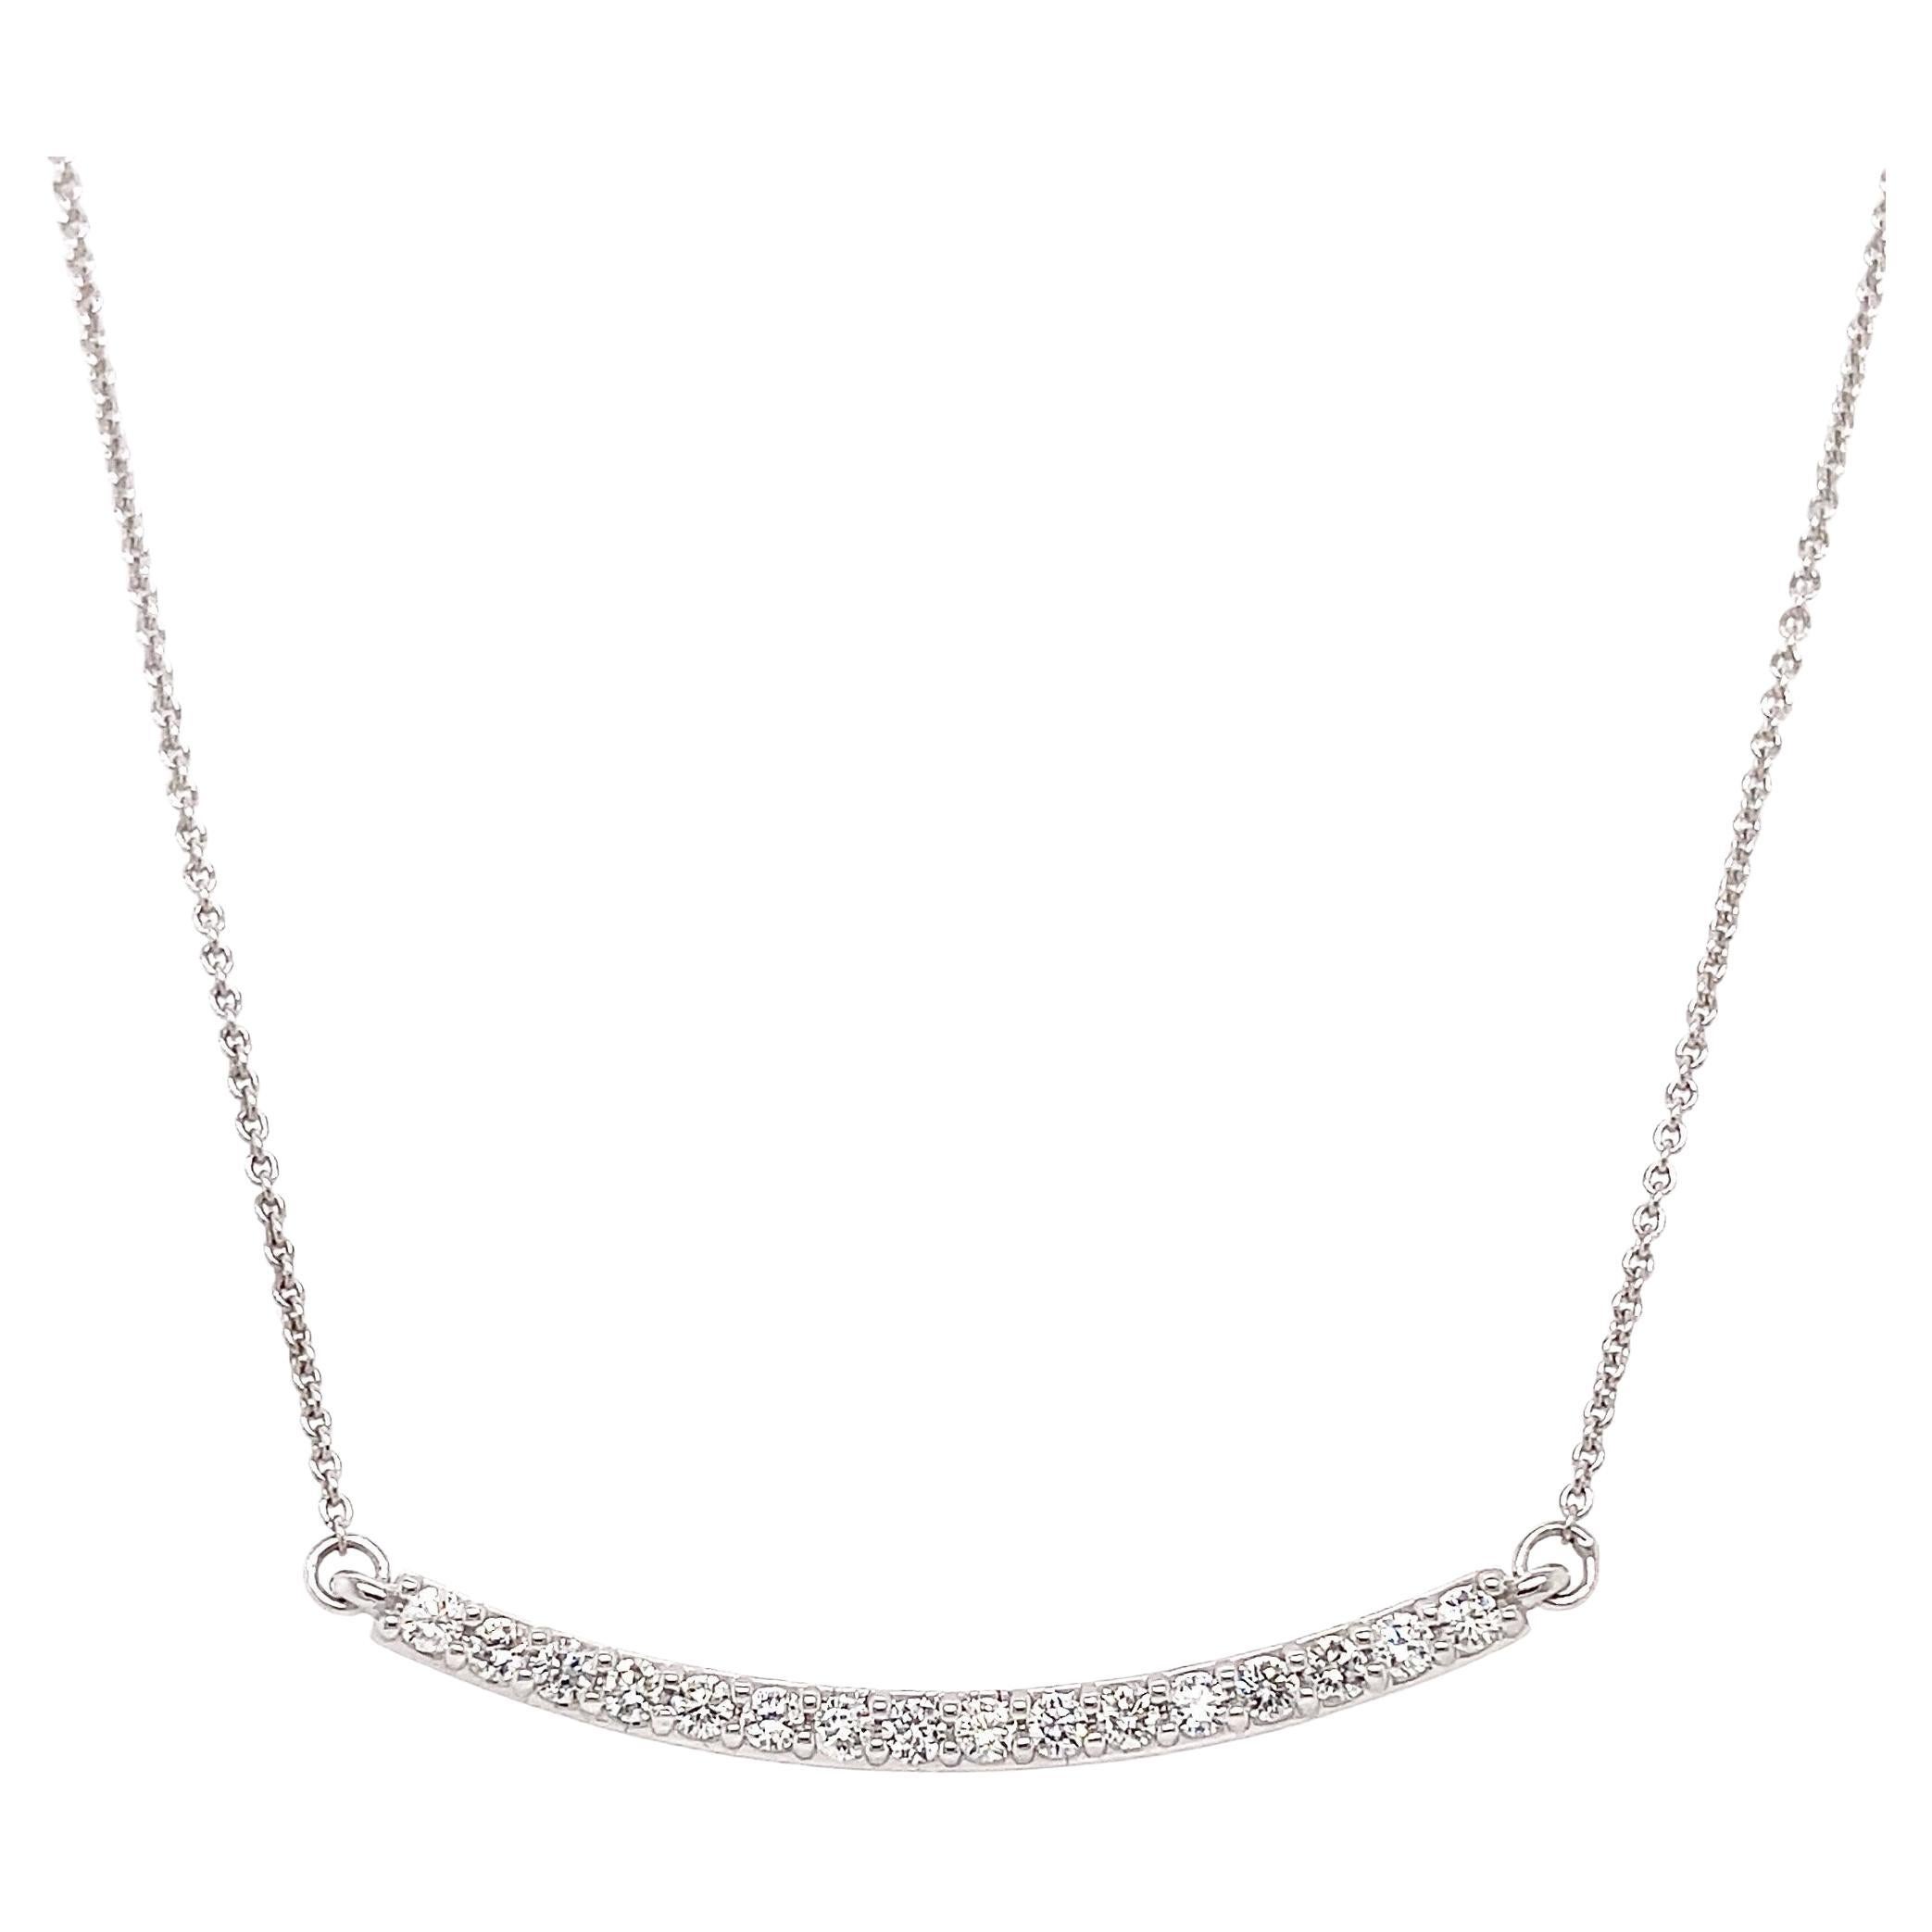 0.48 Carat Diamond Pave Bar Pendant Necklace in 14K White Gold on Chain